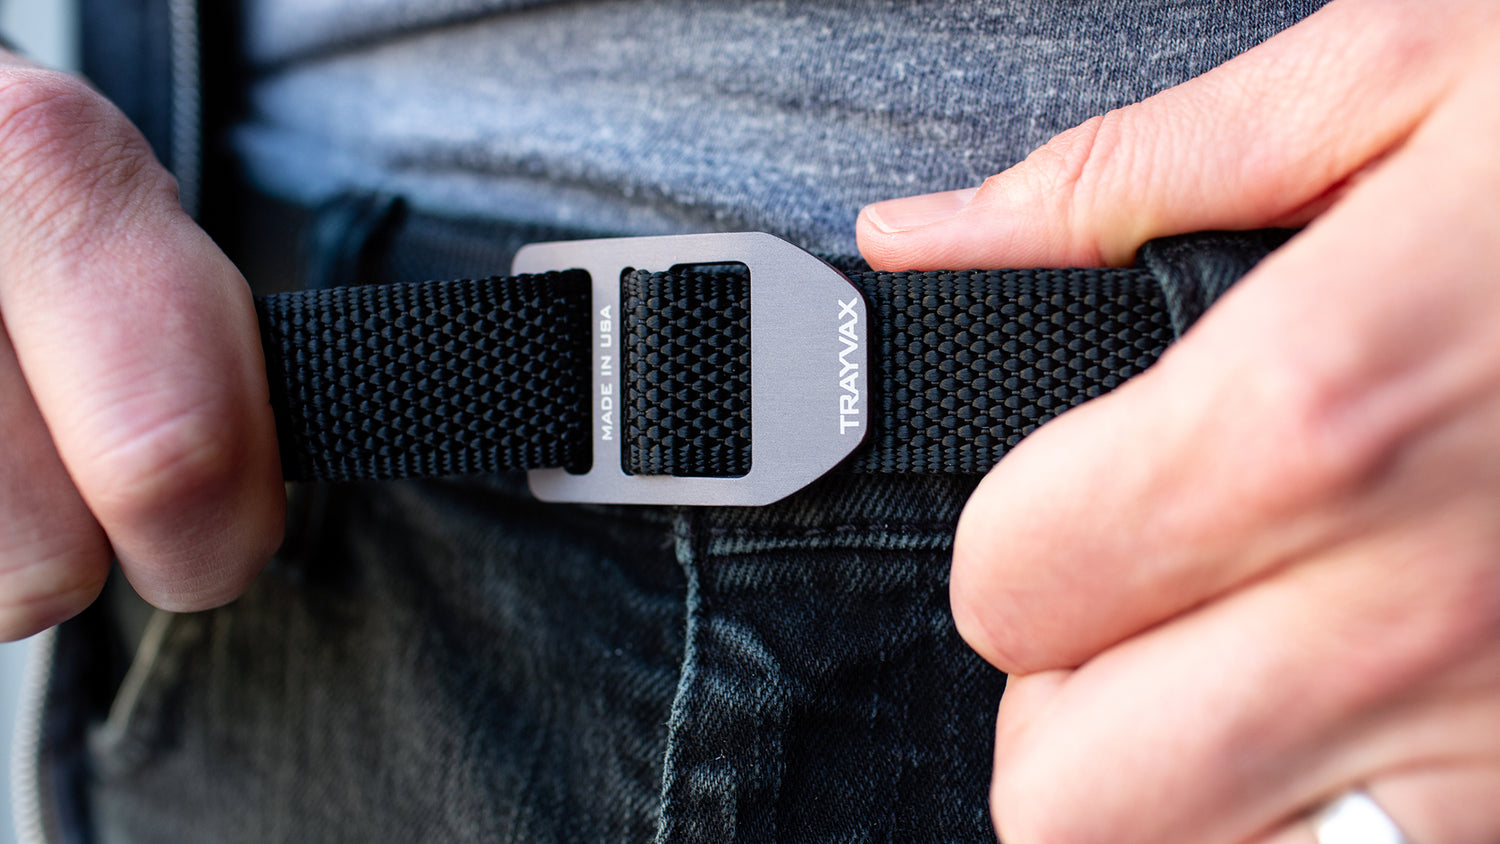 How to Size the Cinch Lite Web Belt